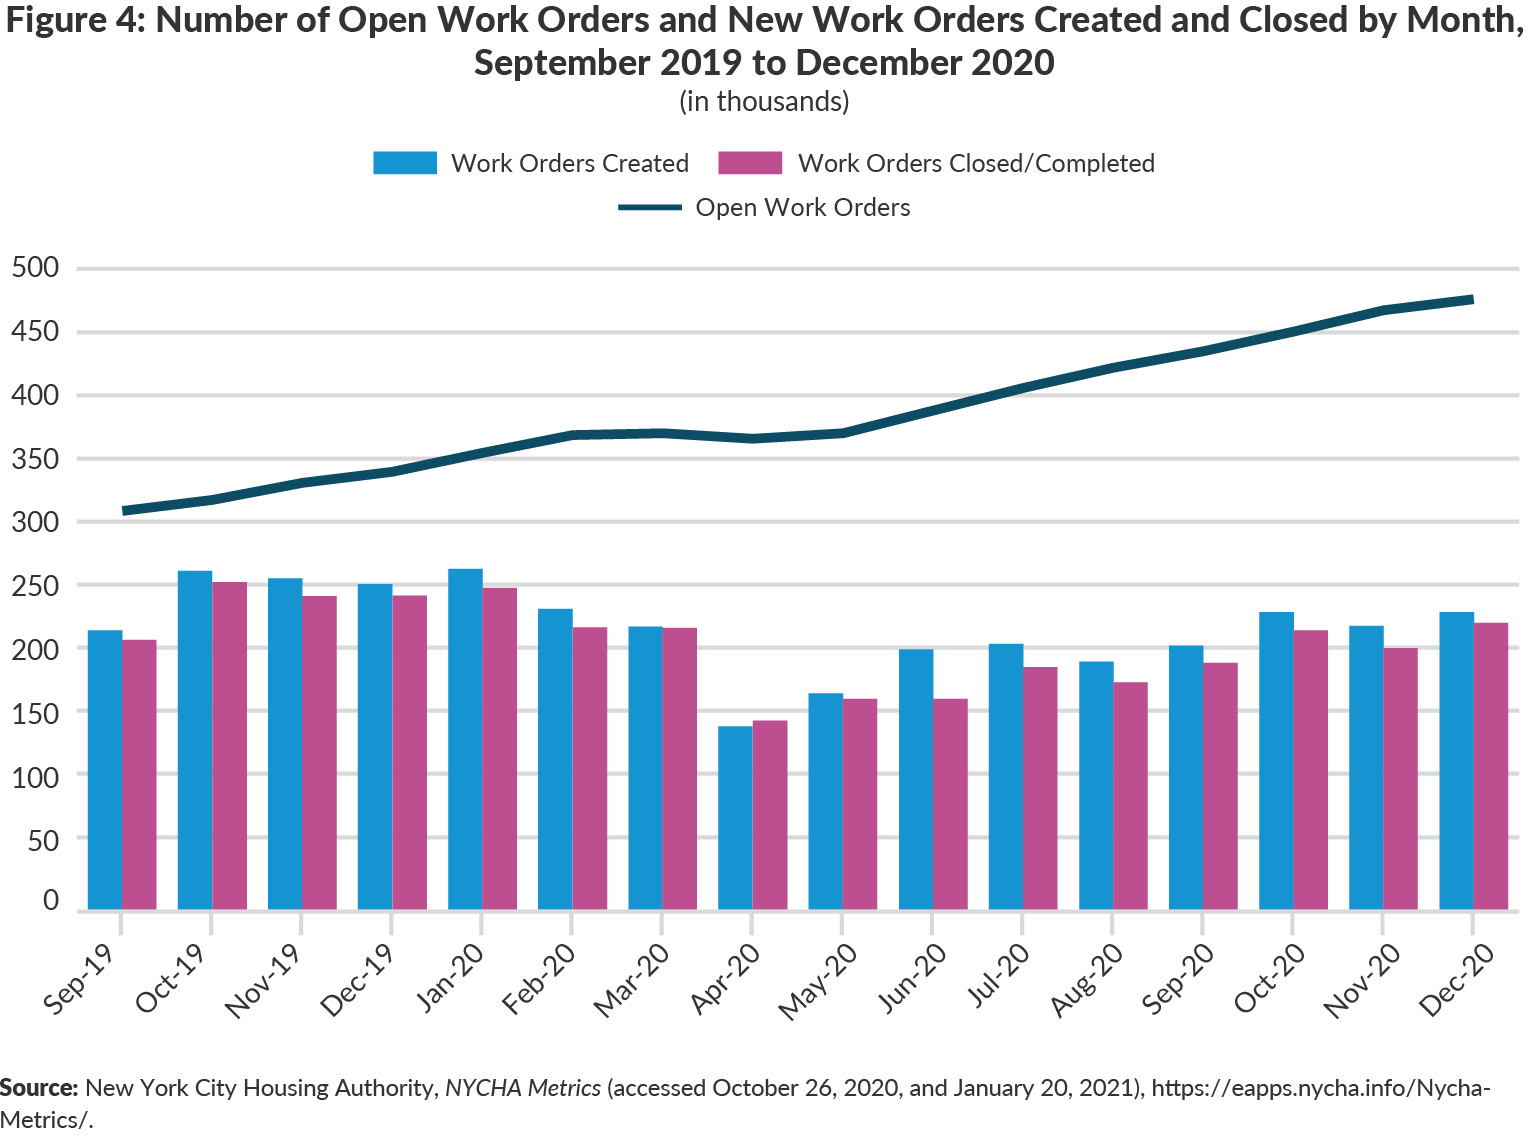 Figure 4. Number of Open Work Orders and New Work Orders Created and Closed by Month, September 2019- December 2020